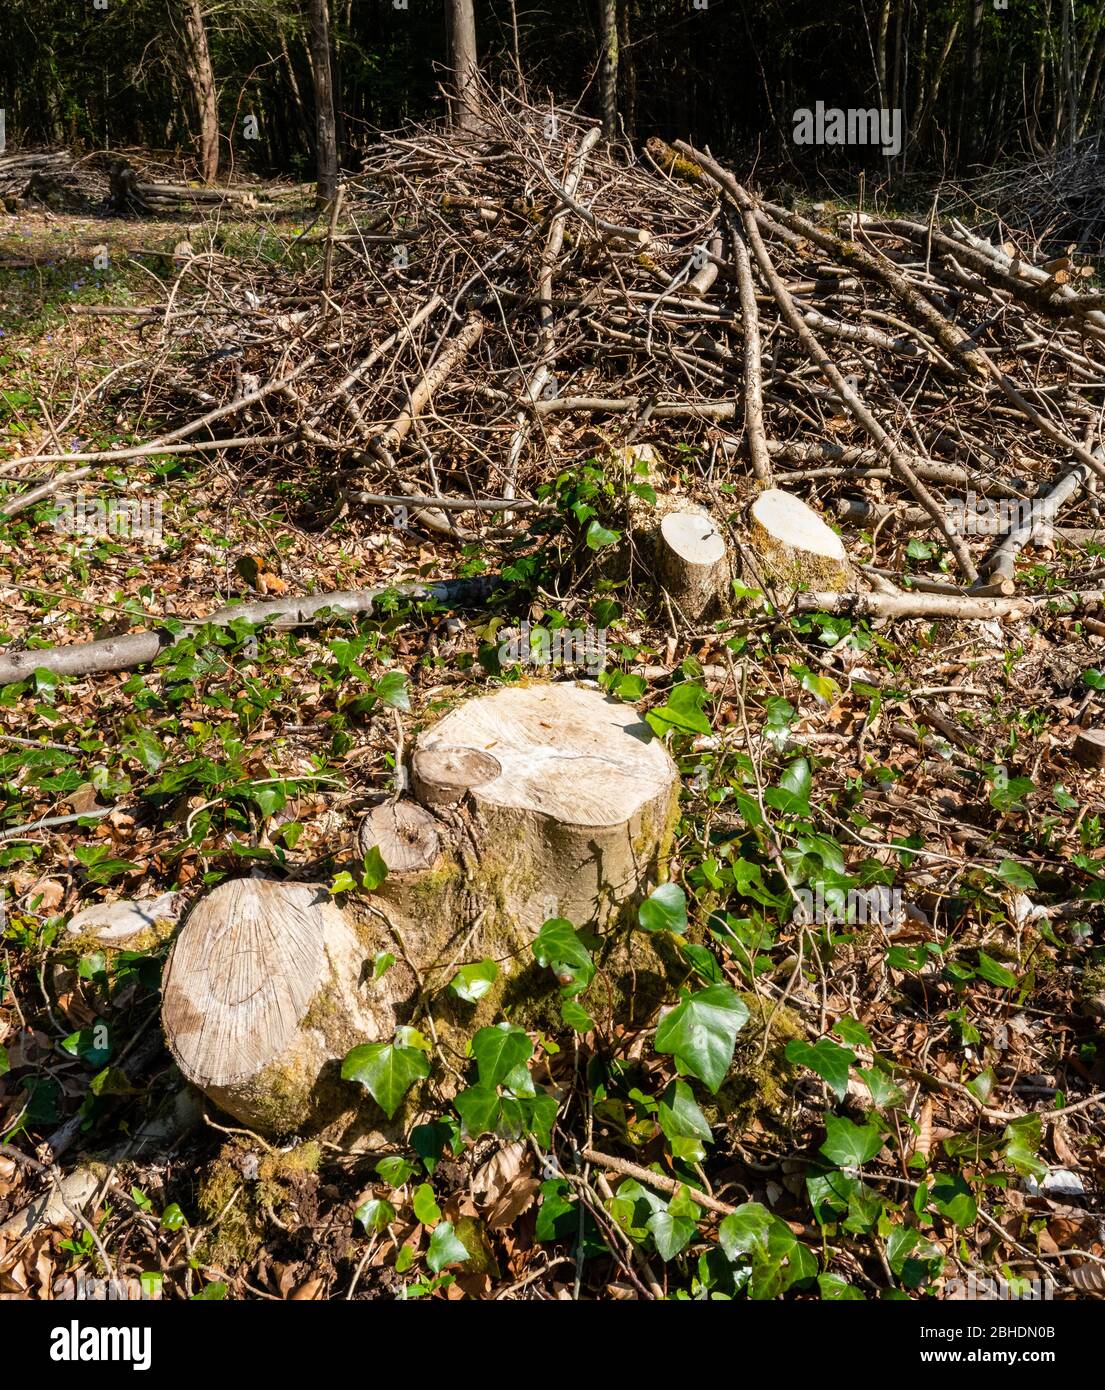 Coppice stools and stack of prunings in an English woodland - Somerset UK - coppicing improves biodiversity and provides a renewable source of timber Stock Photo